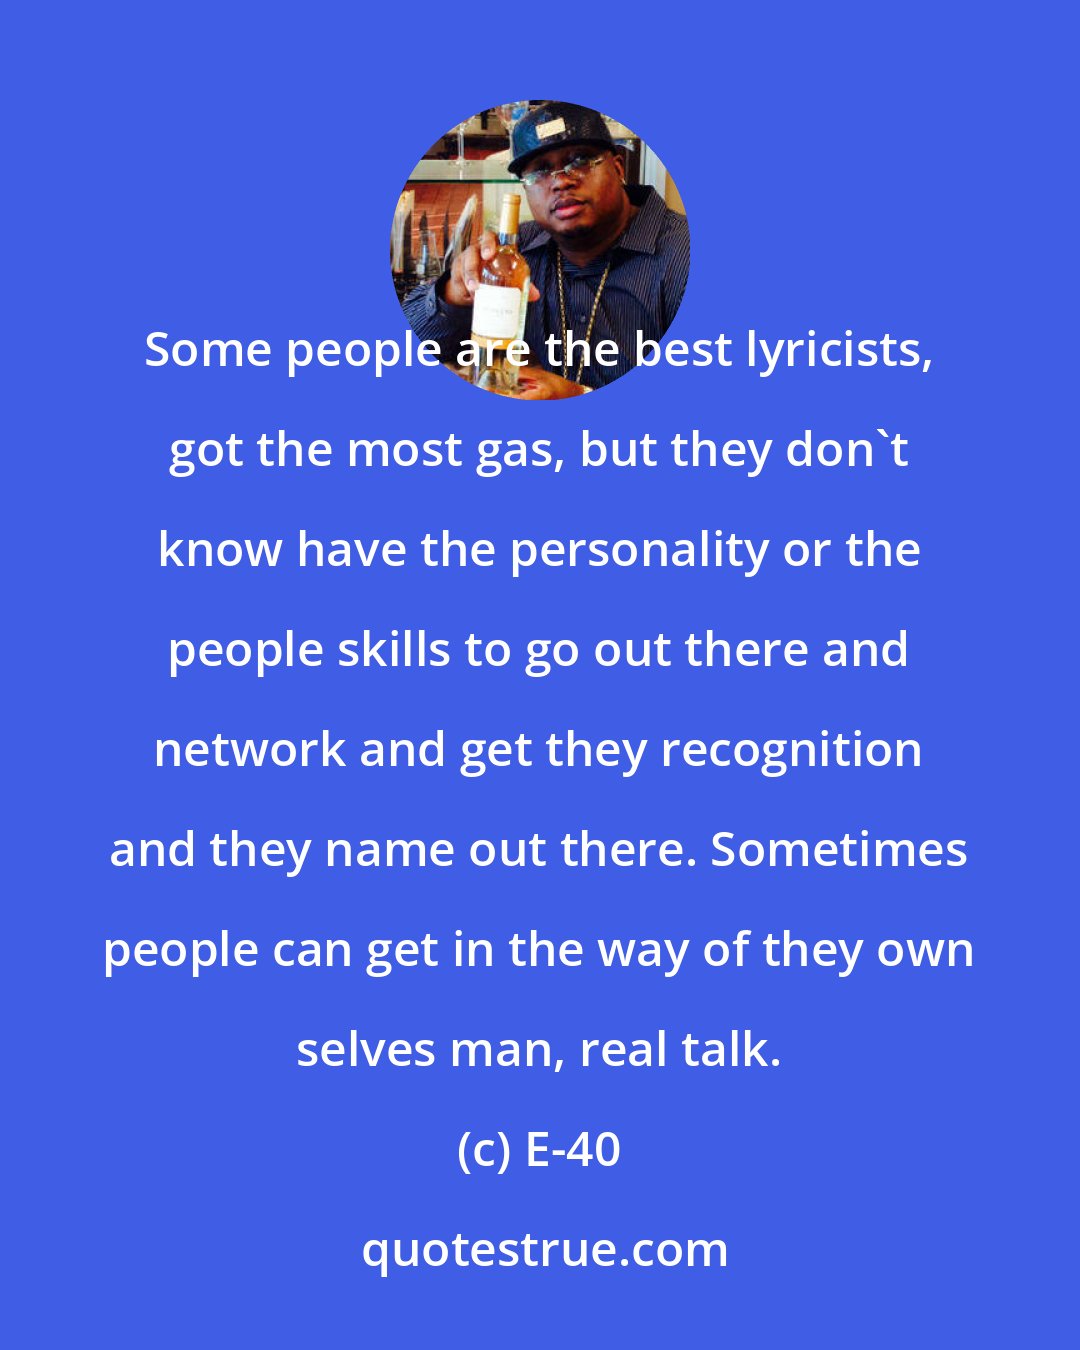 E-40: Some people are the best lyricists, got the most gas, but they don't know have the personality or the people skills to go out there and network and get they recognition and they name out there. Sometimes people can get in the way of they own selves man, real talk.